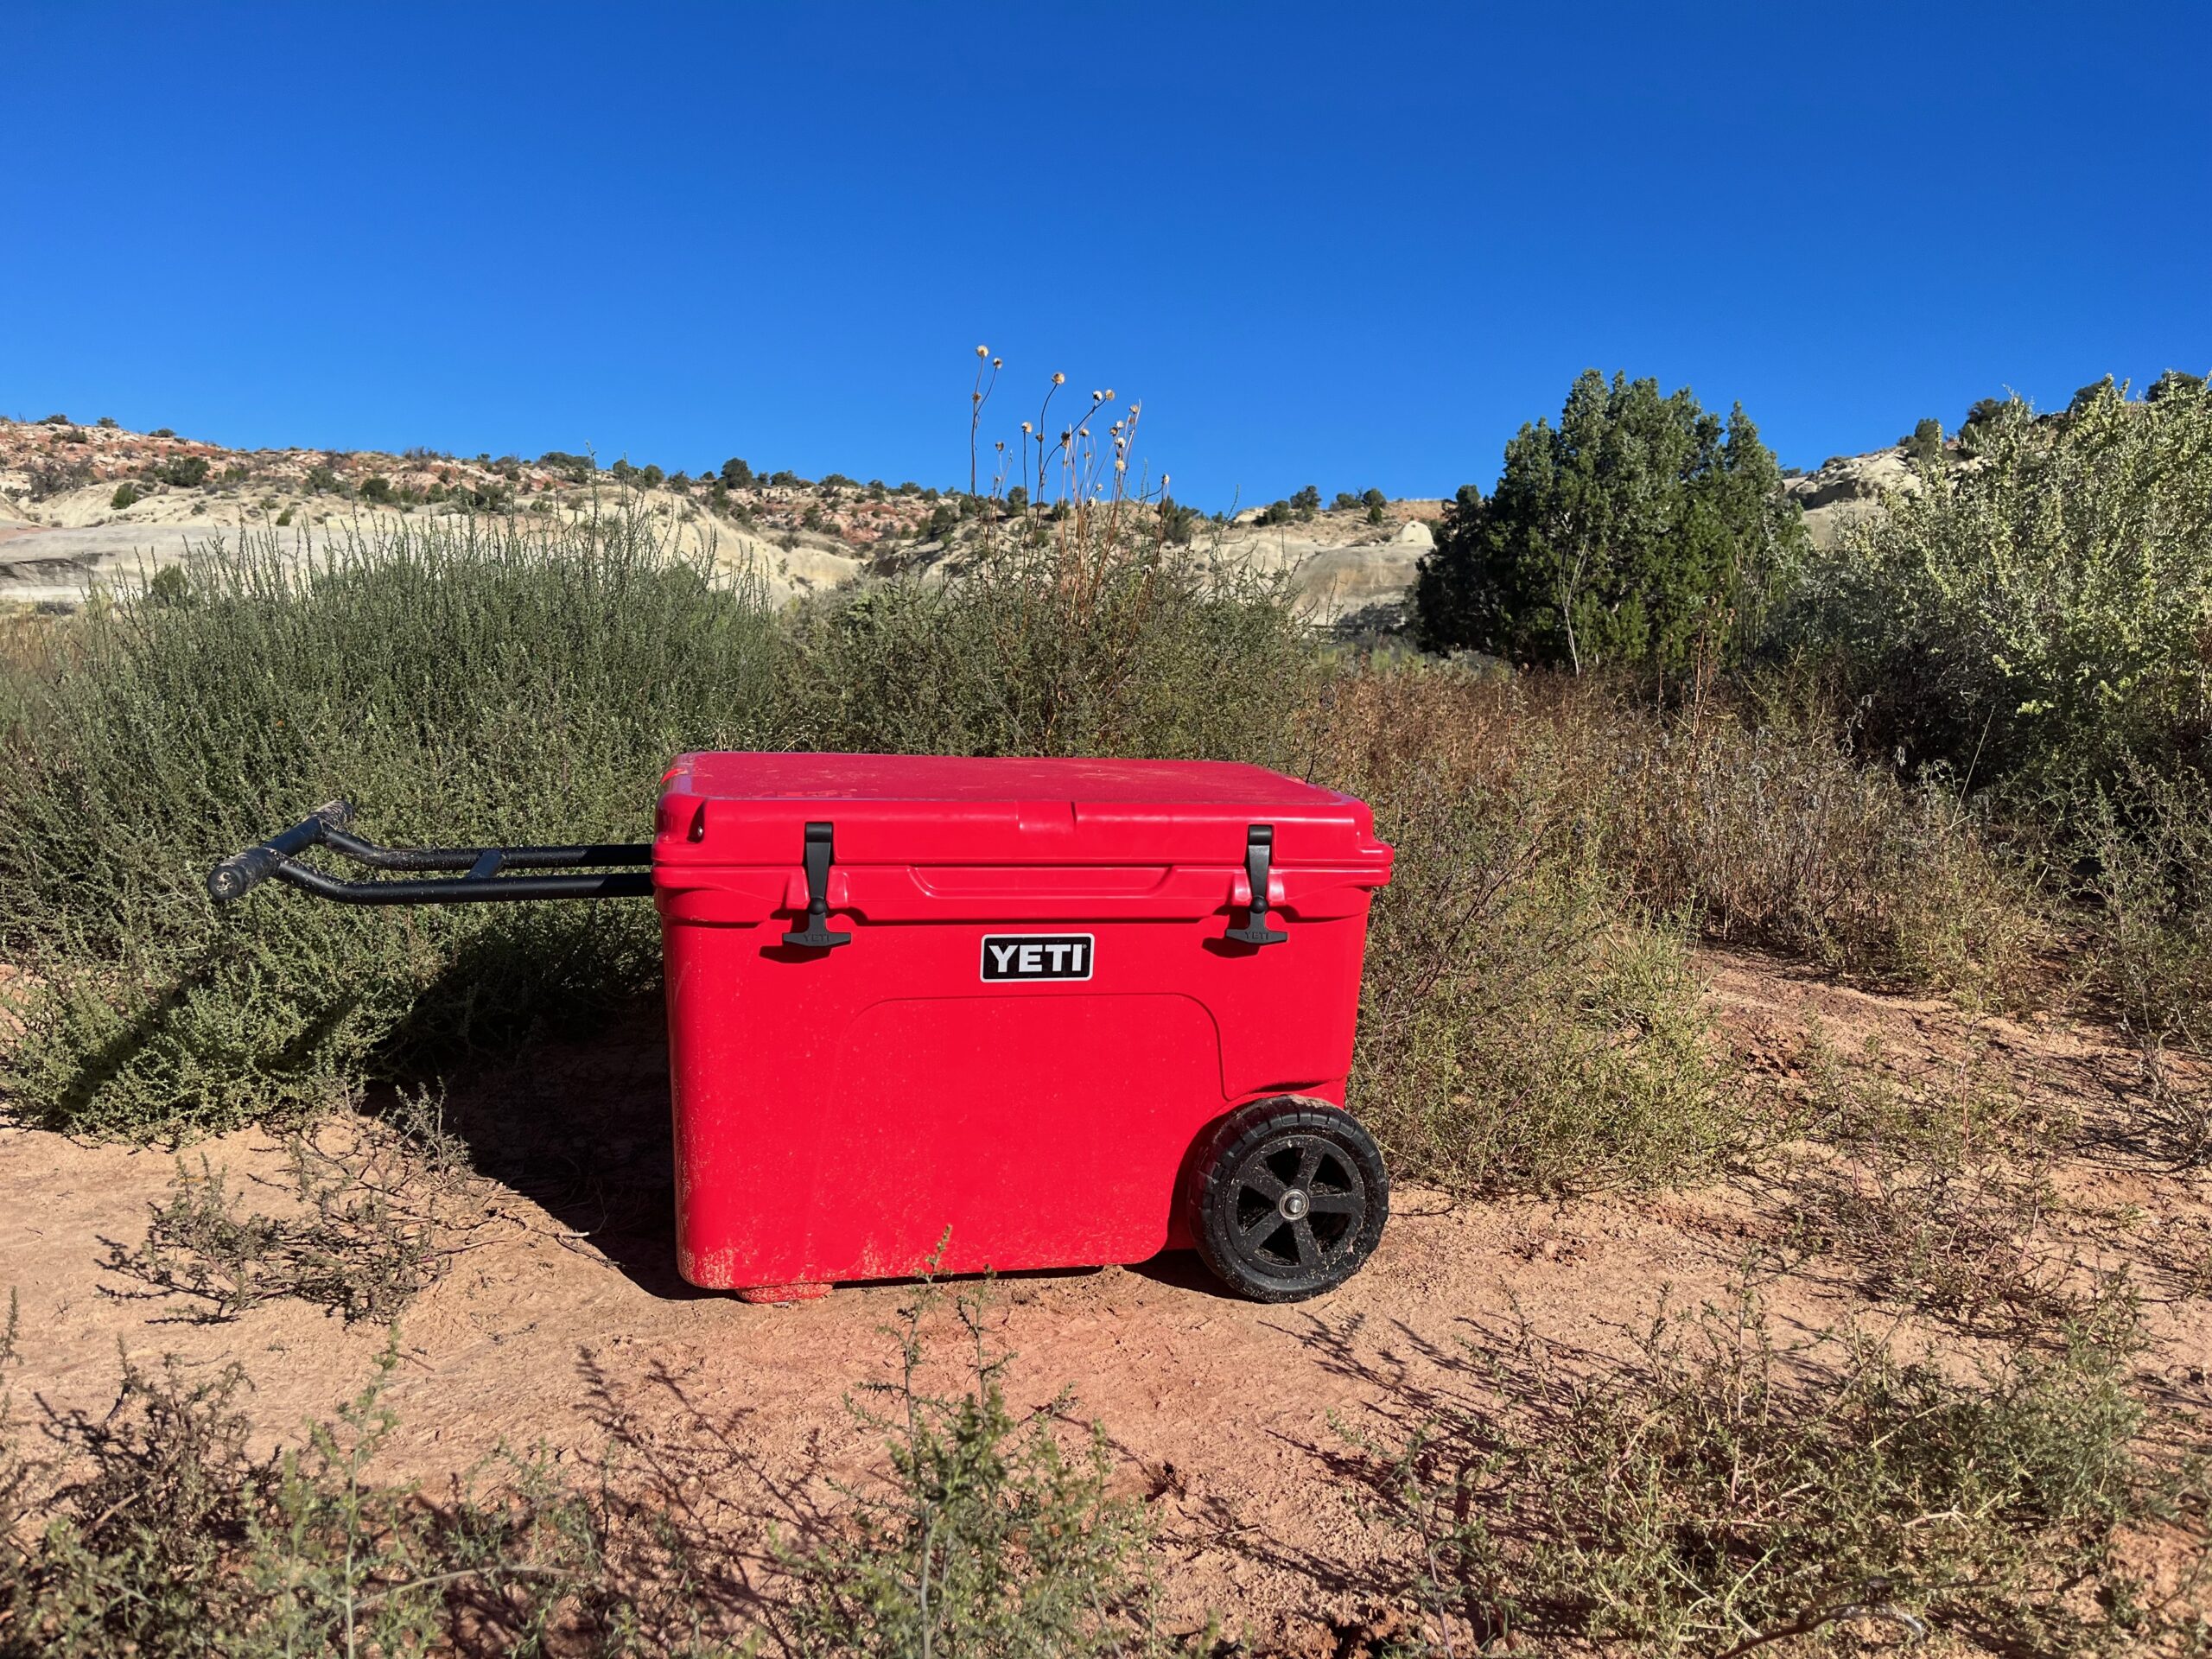 https://www.outdoorlife.com/wp-content/uploads/2023/09/27/best-yeti-coolers-1-scaled.jpeg